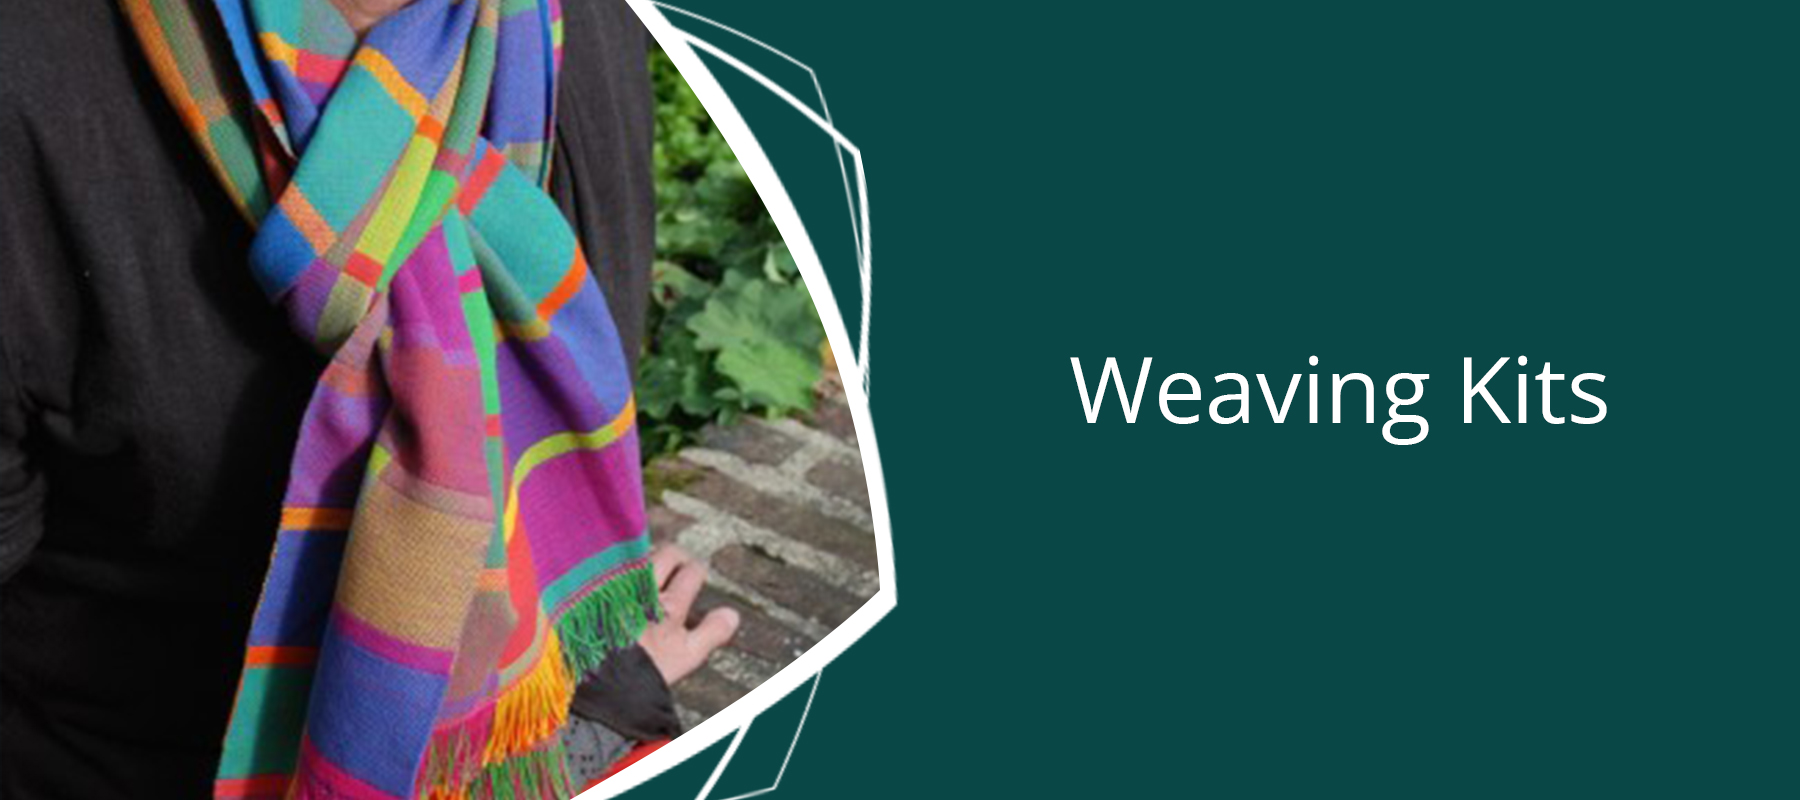 Weaving Kits - Patterns and Yarn for Your Next Project 